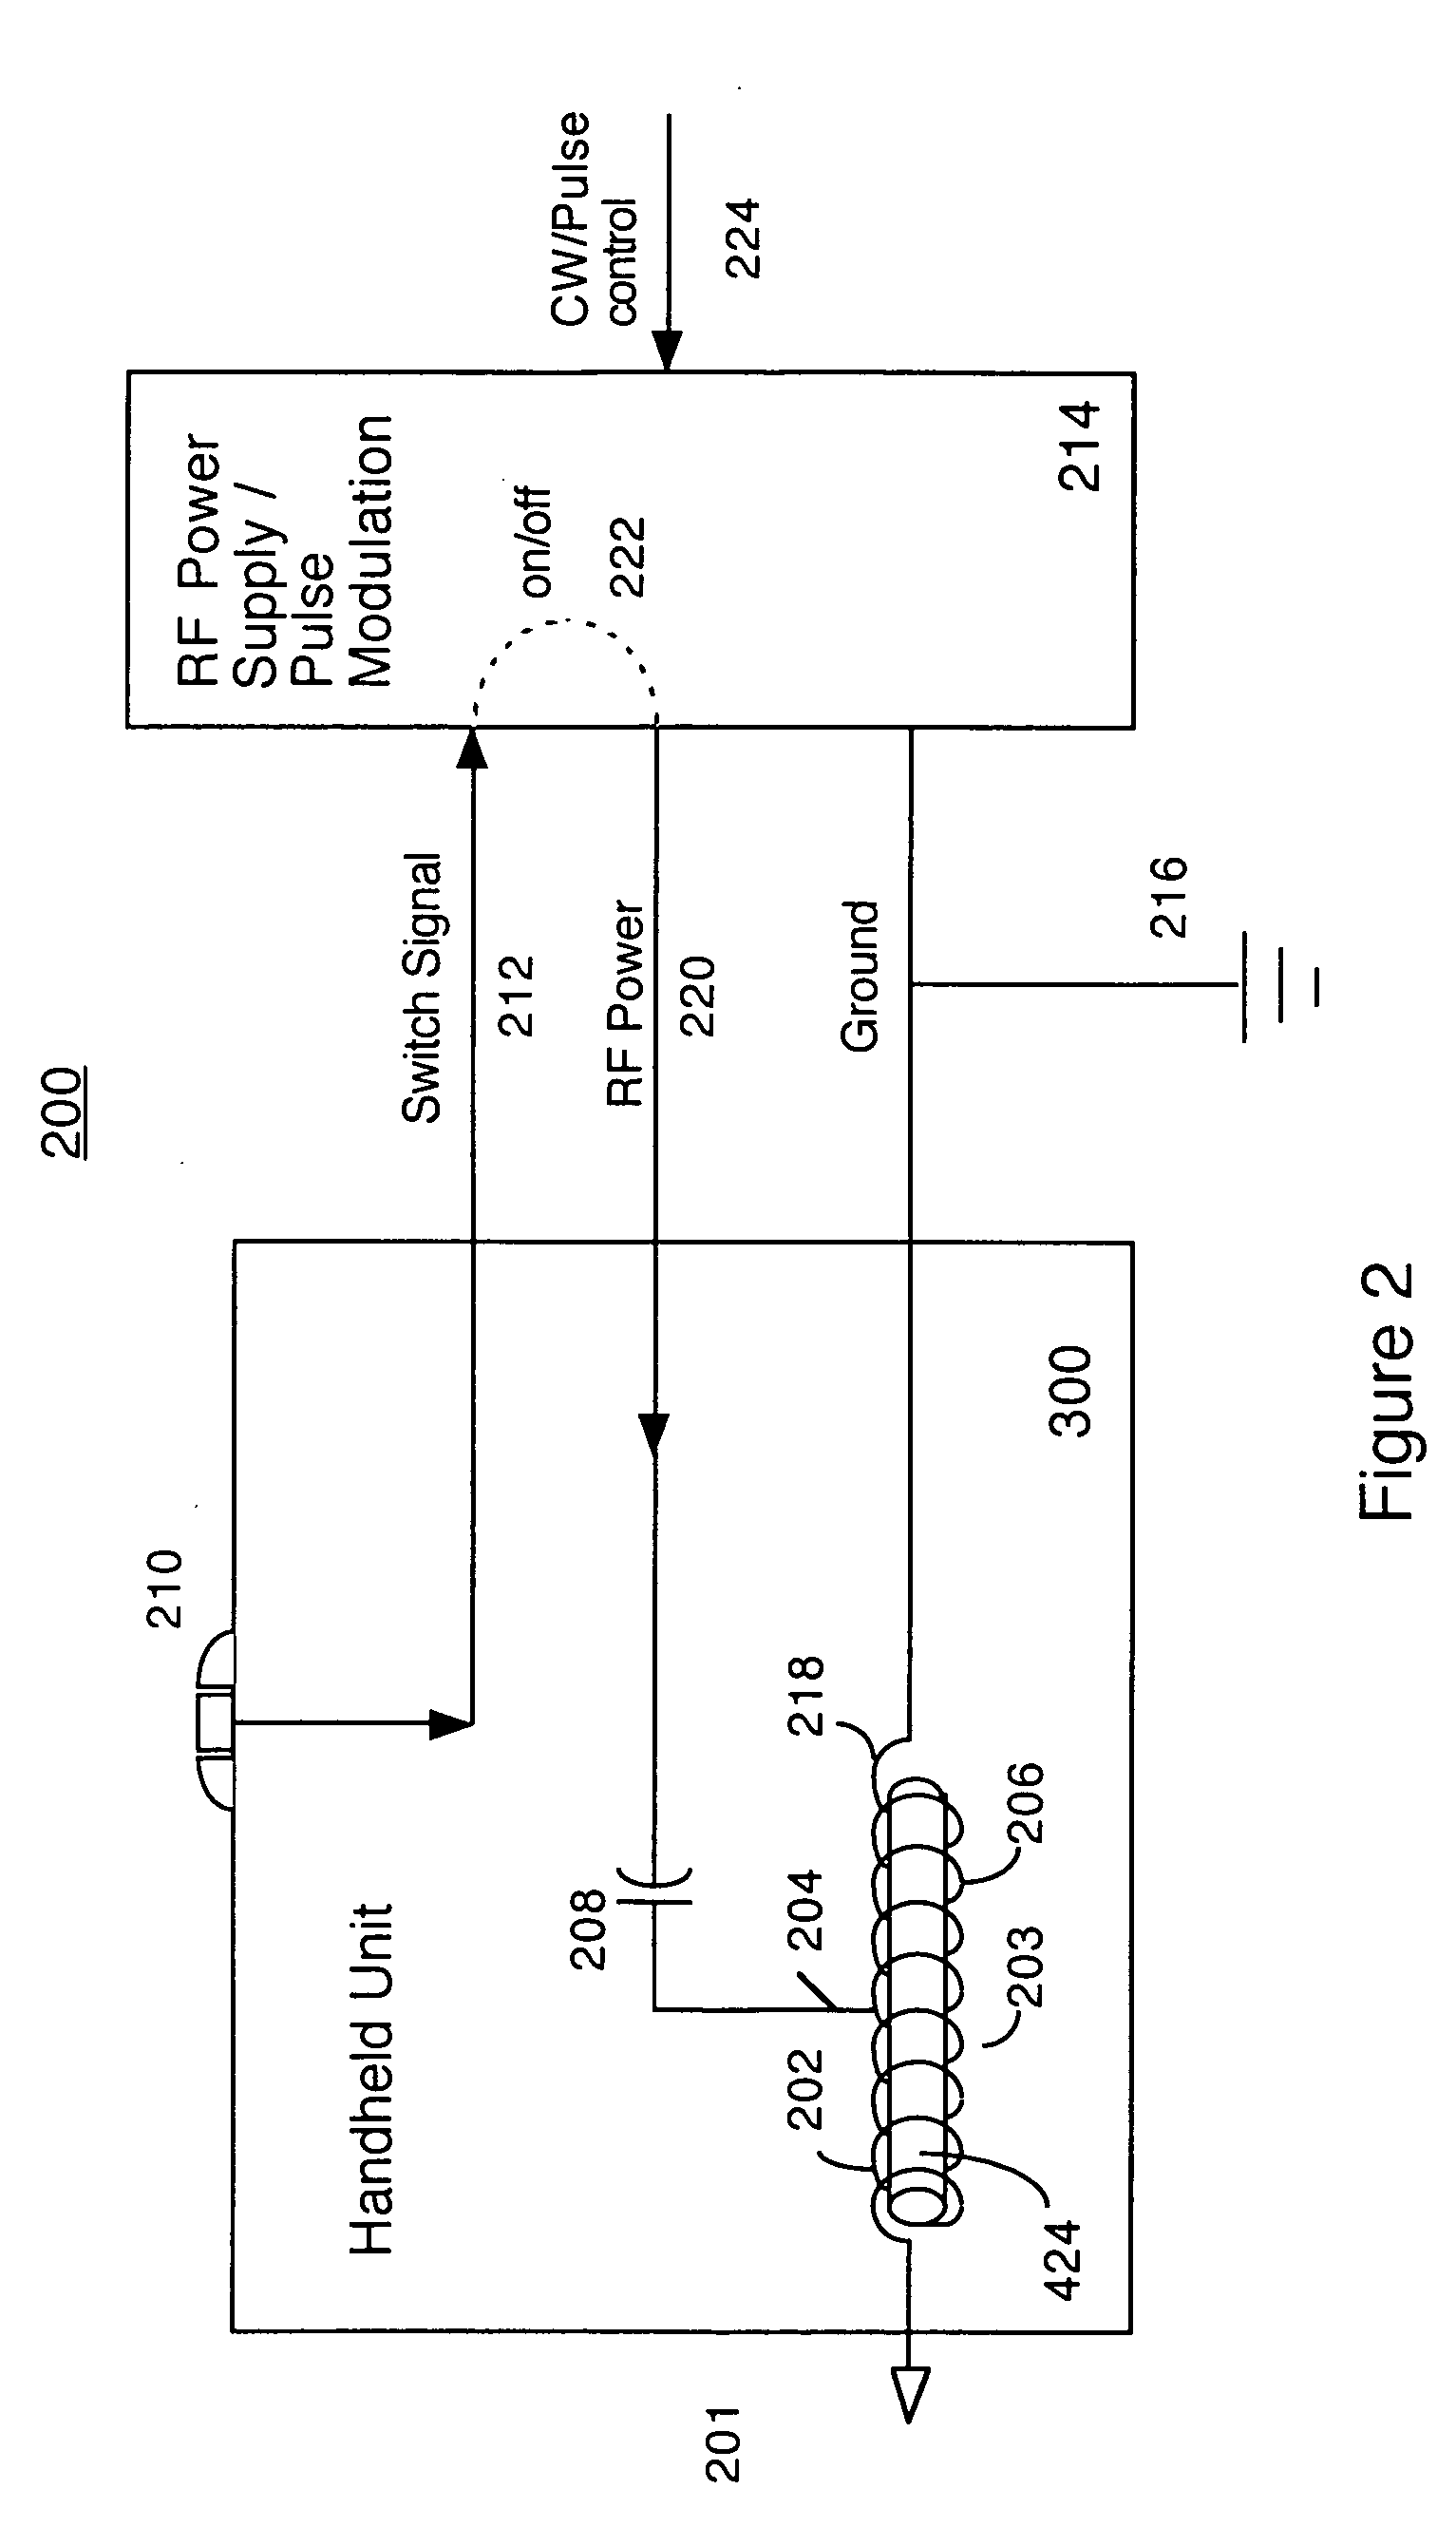 Electrosurgical cutting and cauterizing device